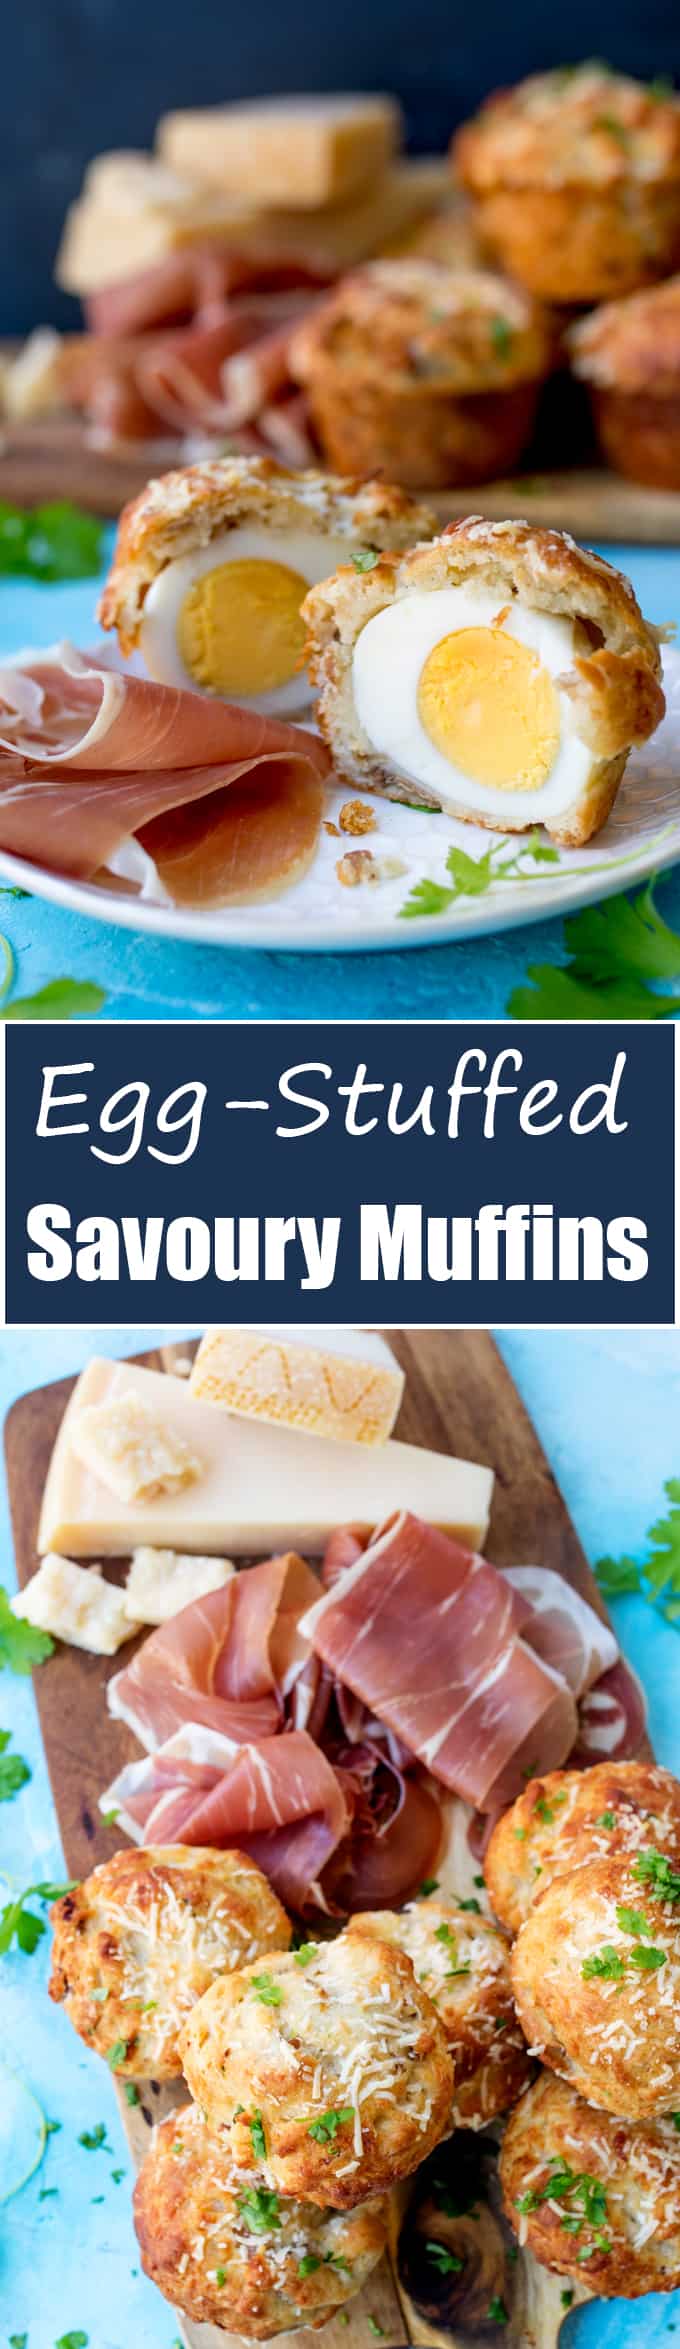 These egg stuffed muffins are cheesy and delicious - perfect for a picnic